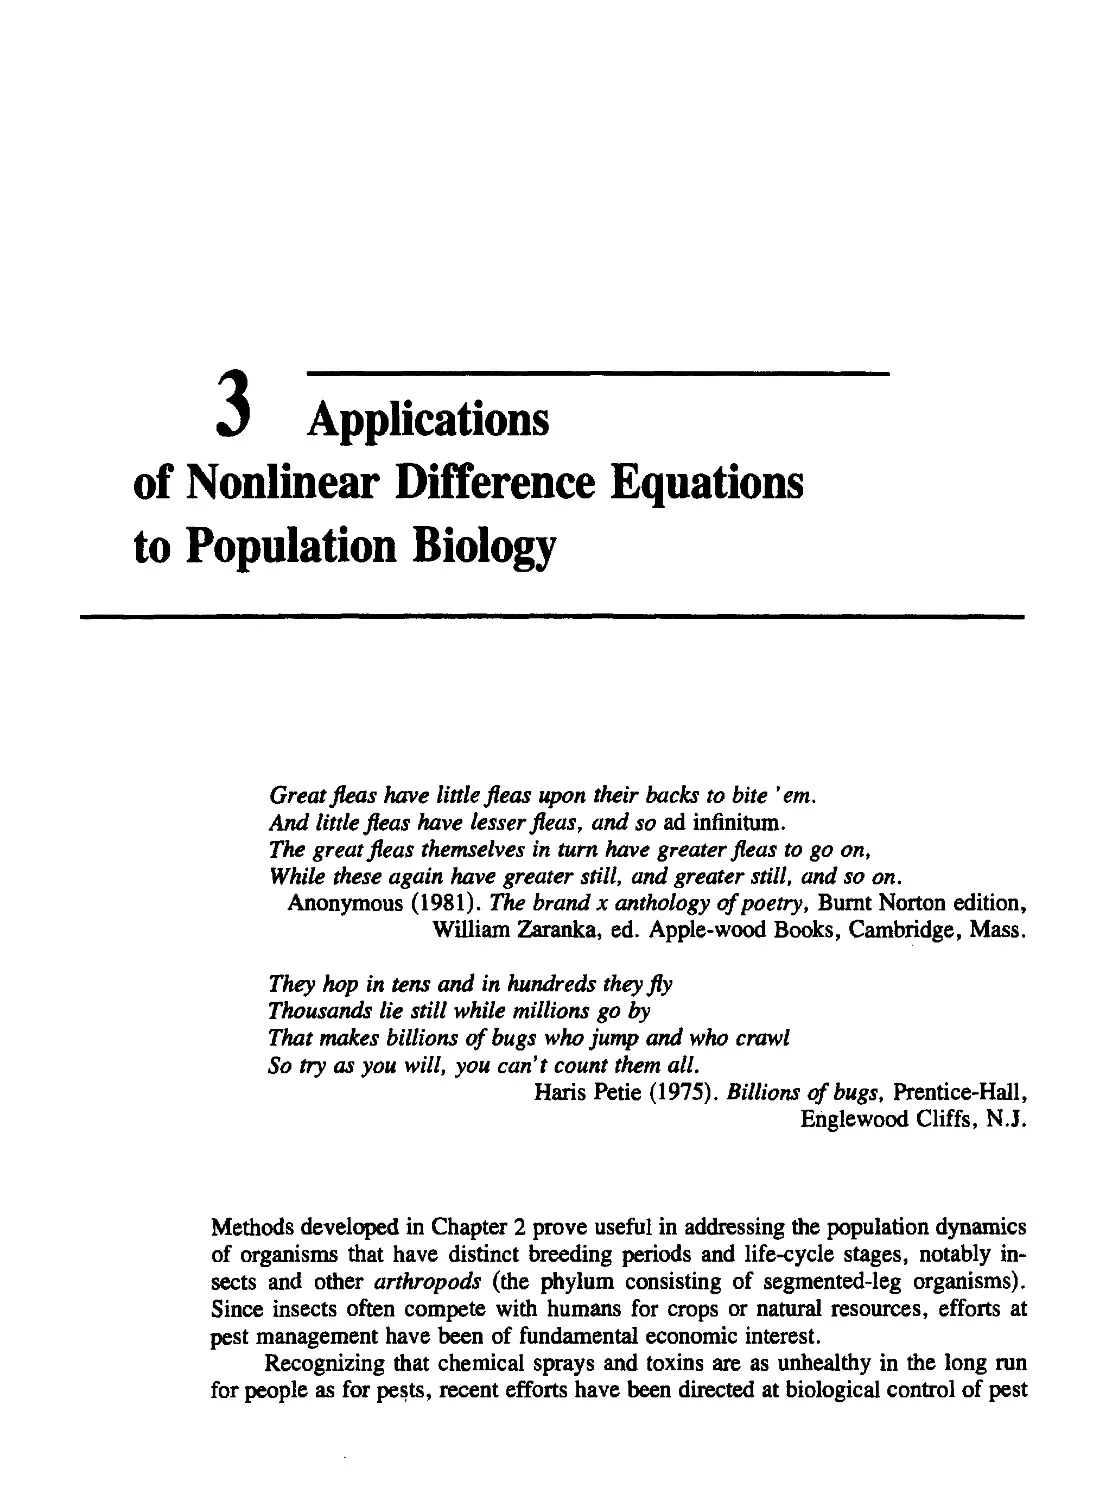 Chapter 3 Applications of Nonlinear Difference Equations to Population Biology